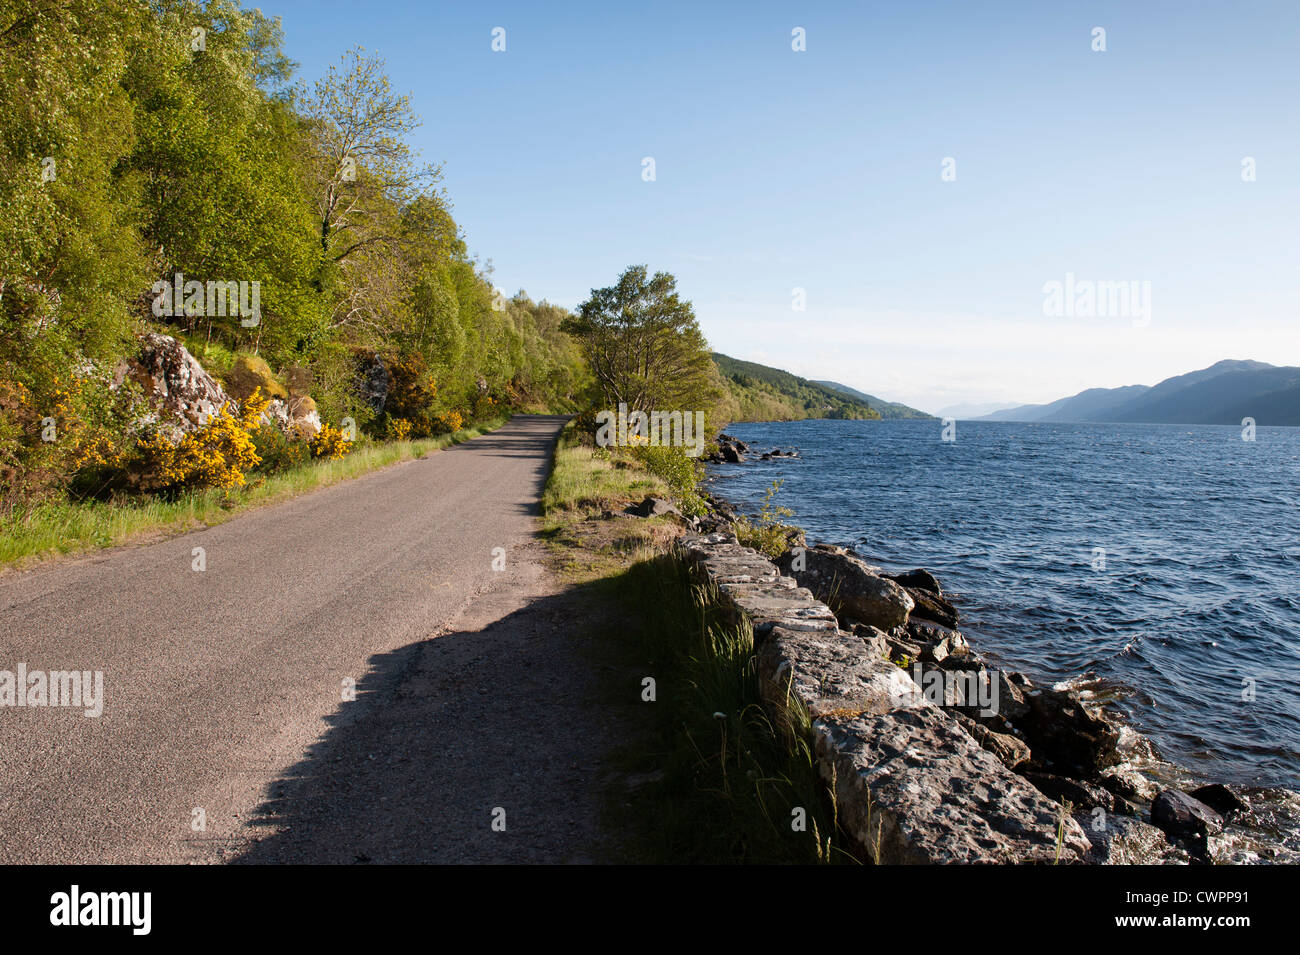 Scotland is a beautiful country. Stunning views around the famous Loch Ness. Stock Photo